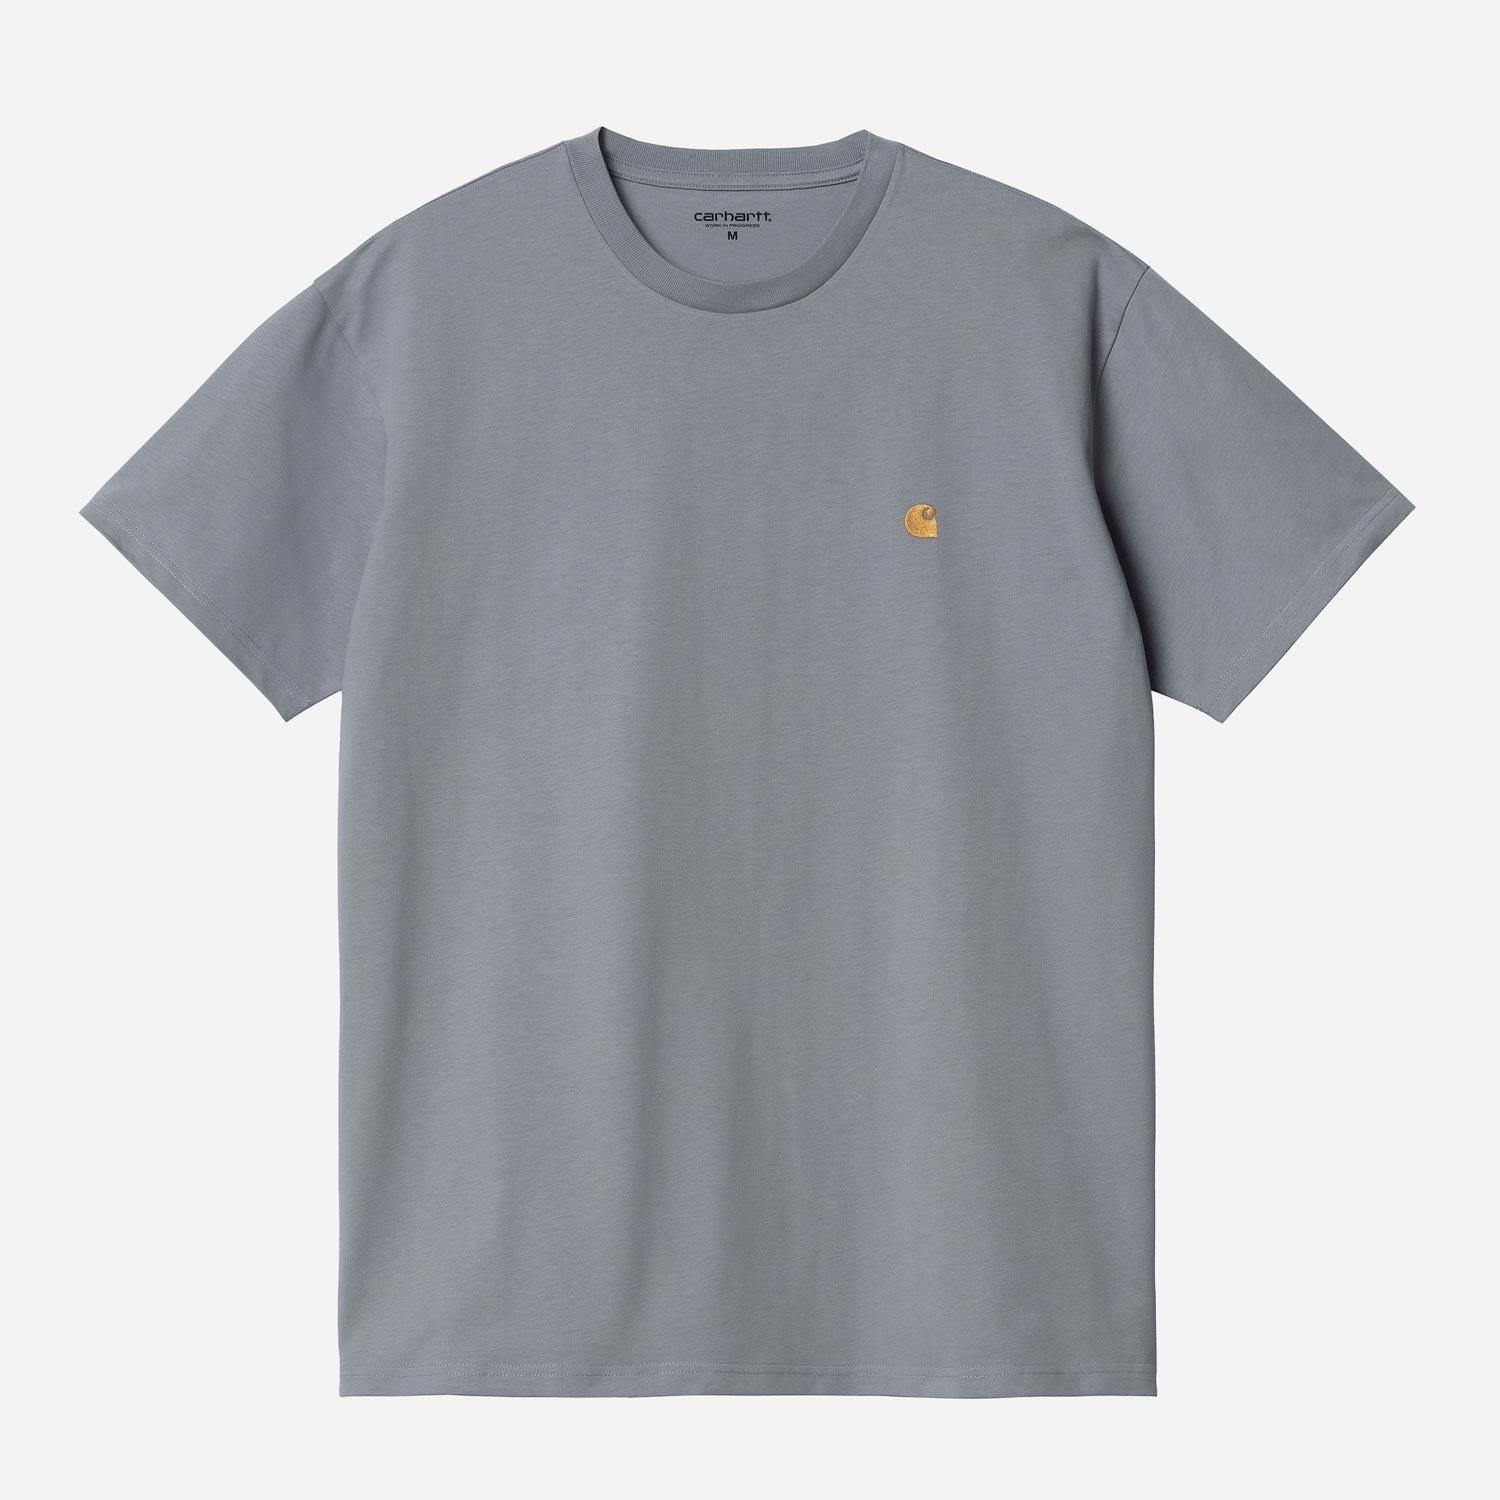 Carhartt WIP Chase Loose Fit Tee - Mirror/Gold